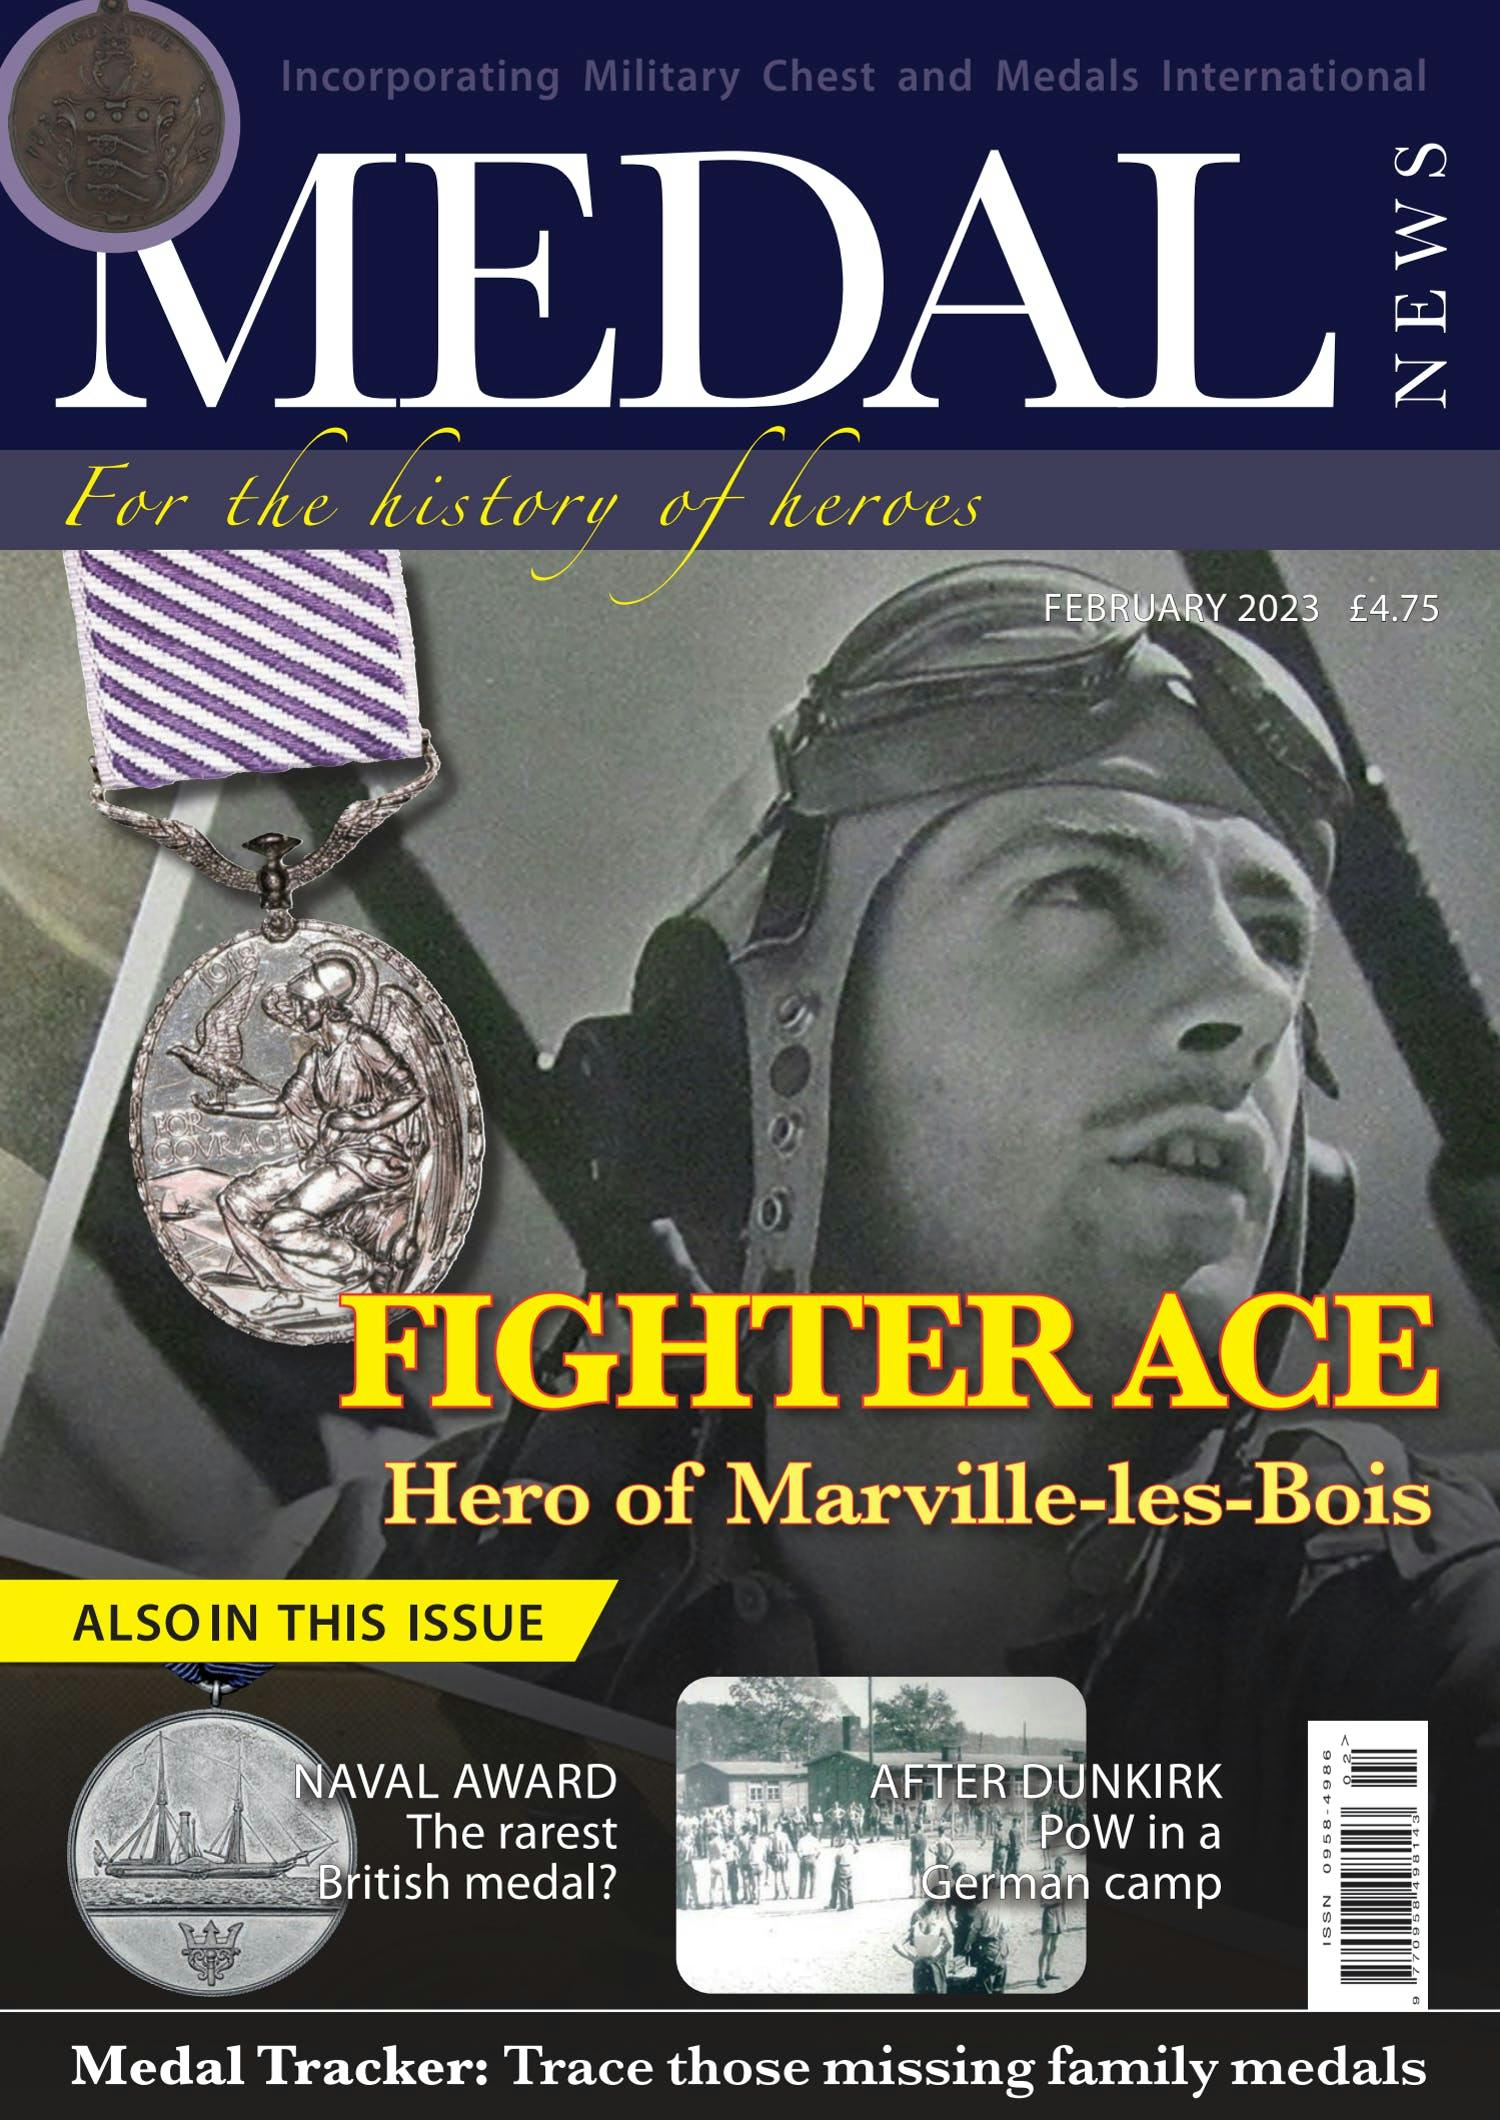 Front cover of 'Fighter Ace', Medal News February 2023, Volume 61, Number 2 by Token Publishing